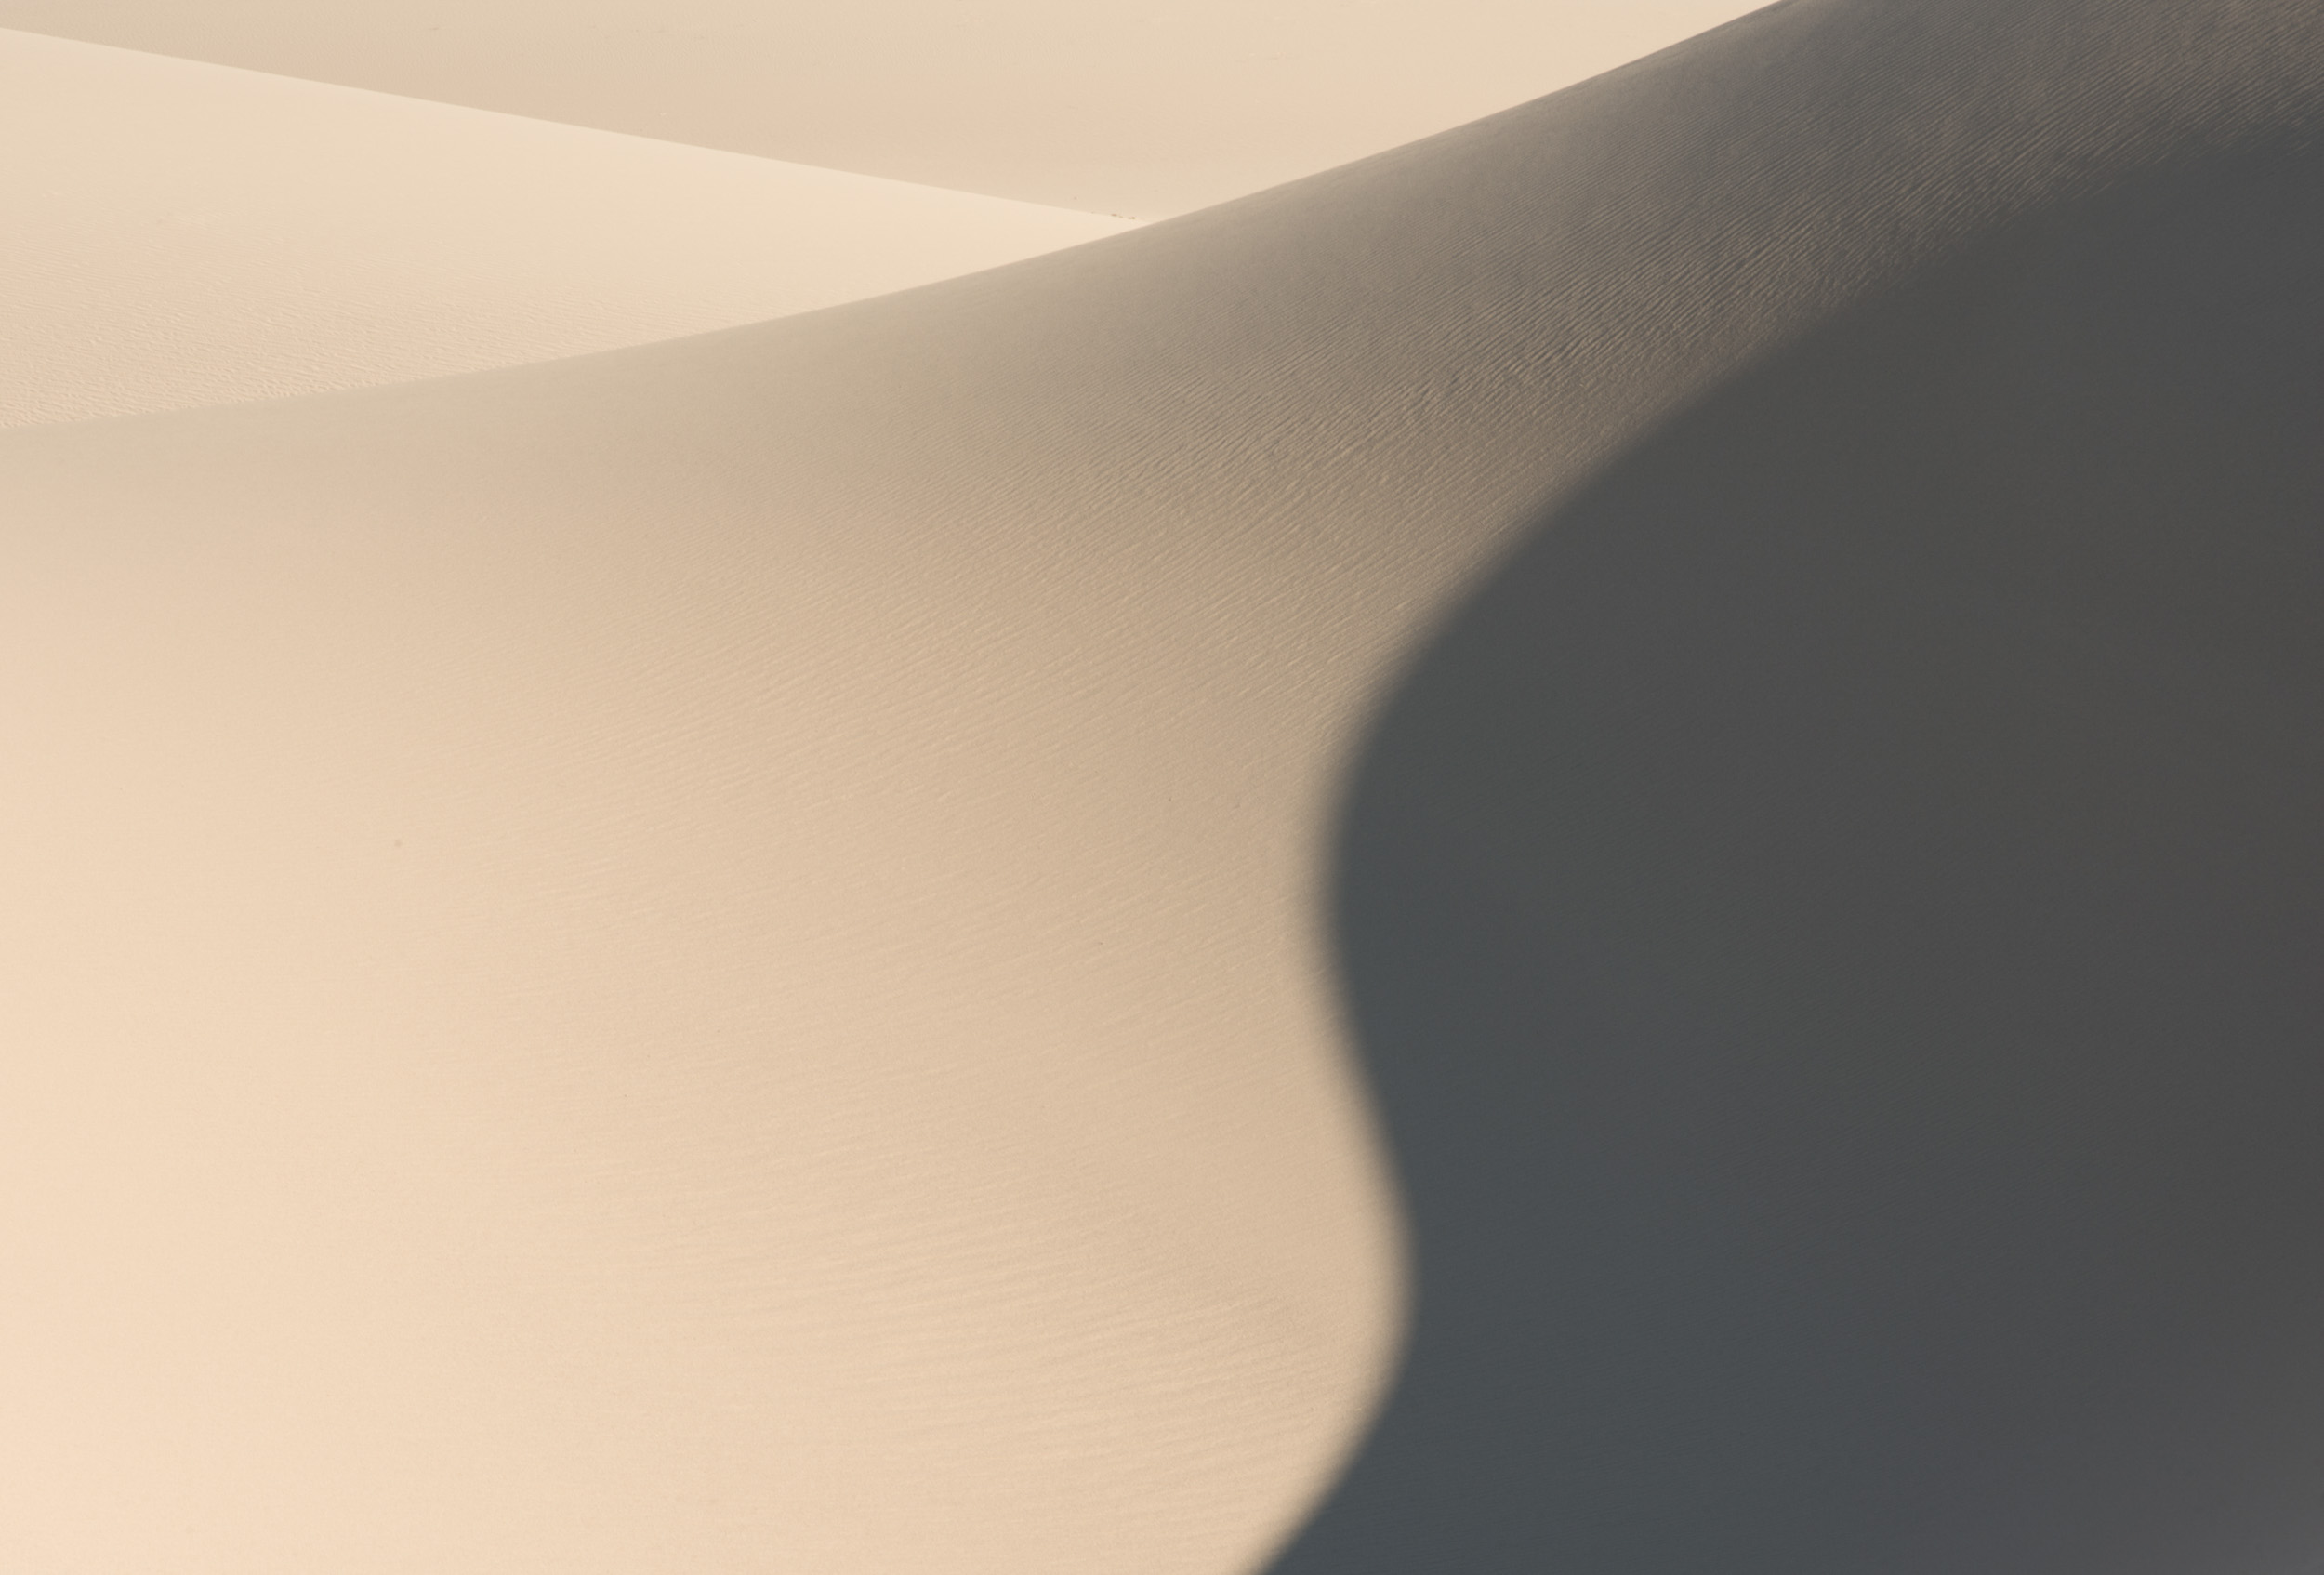 Abstract nature series on light, shadow and lines on the Eureka Dunes in Death Valley National Park.